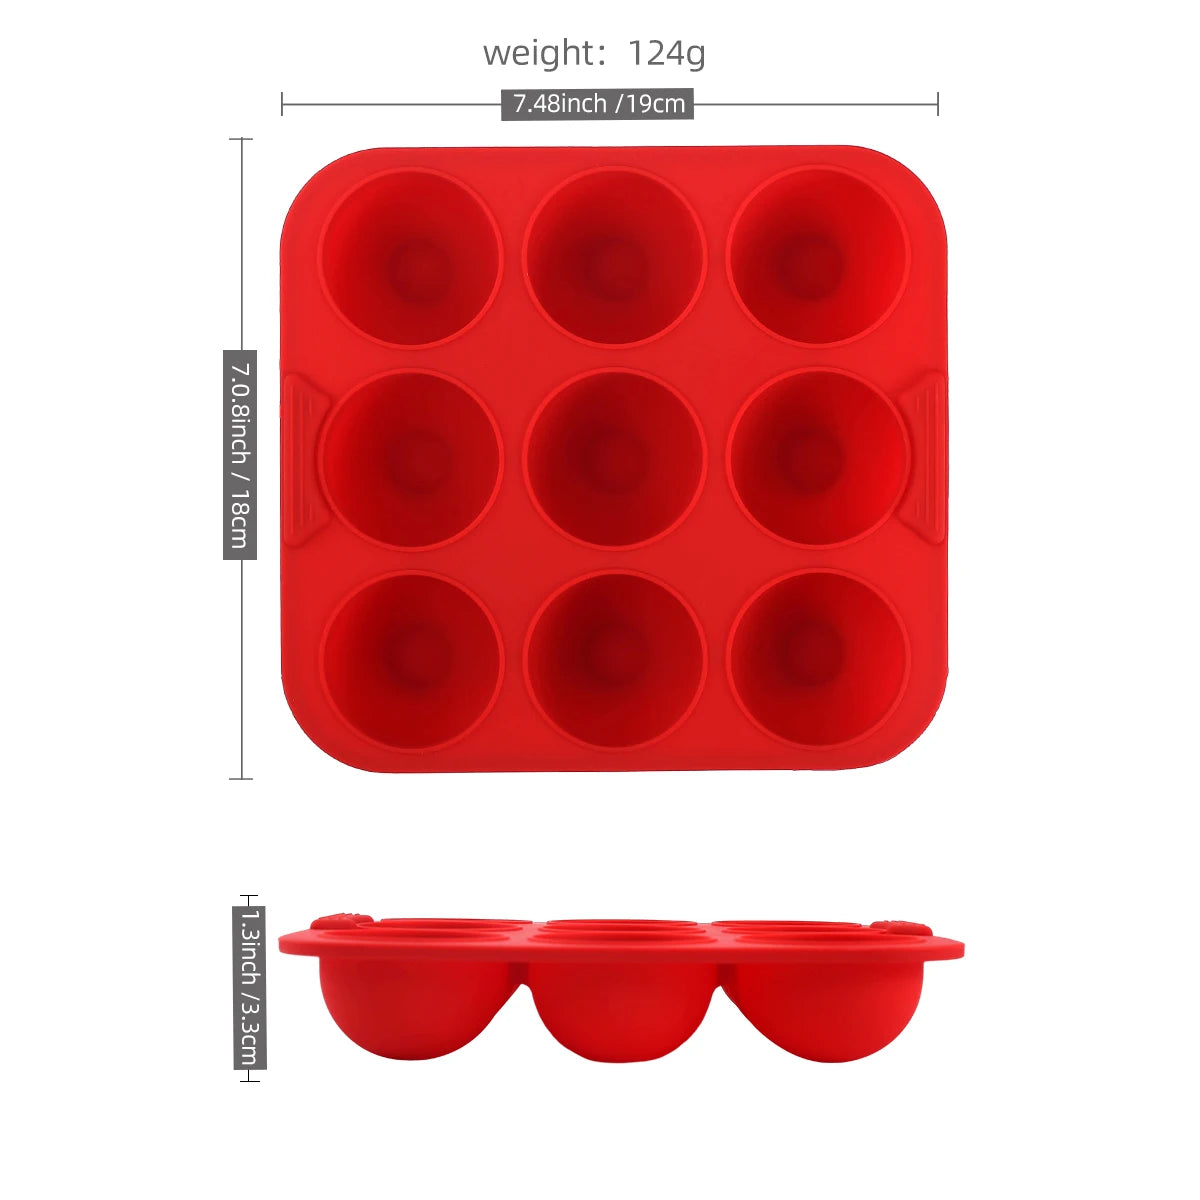 Square Air Fryer Silicone 9-Cavity Cake Baking tray.